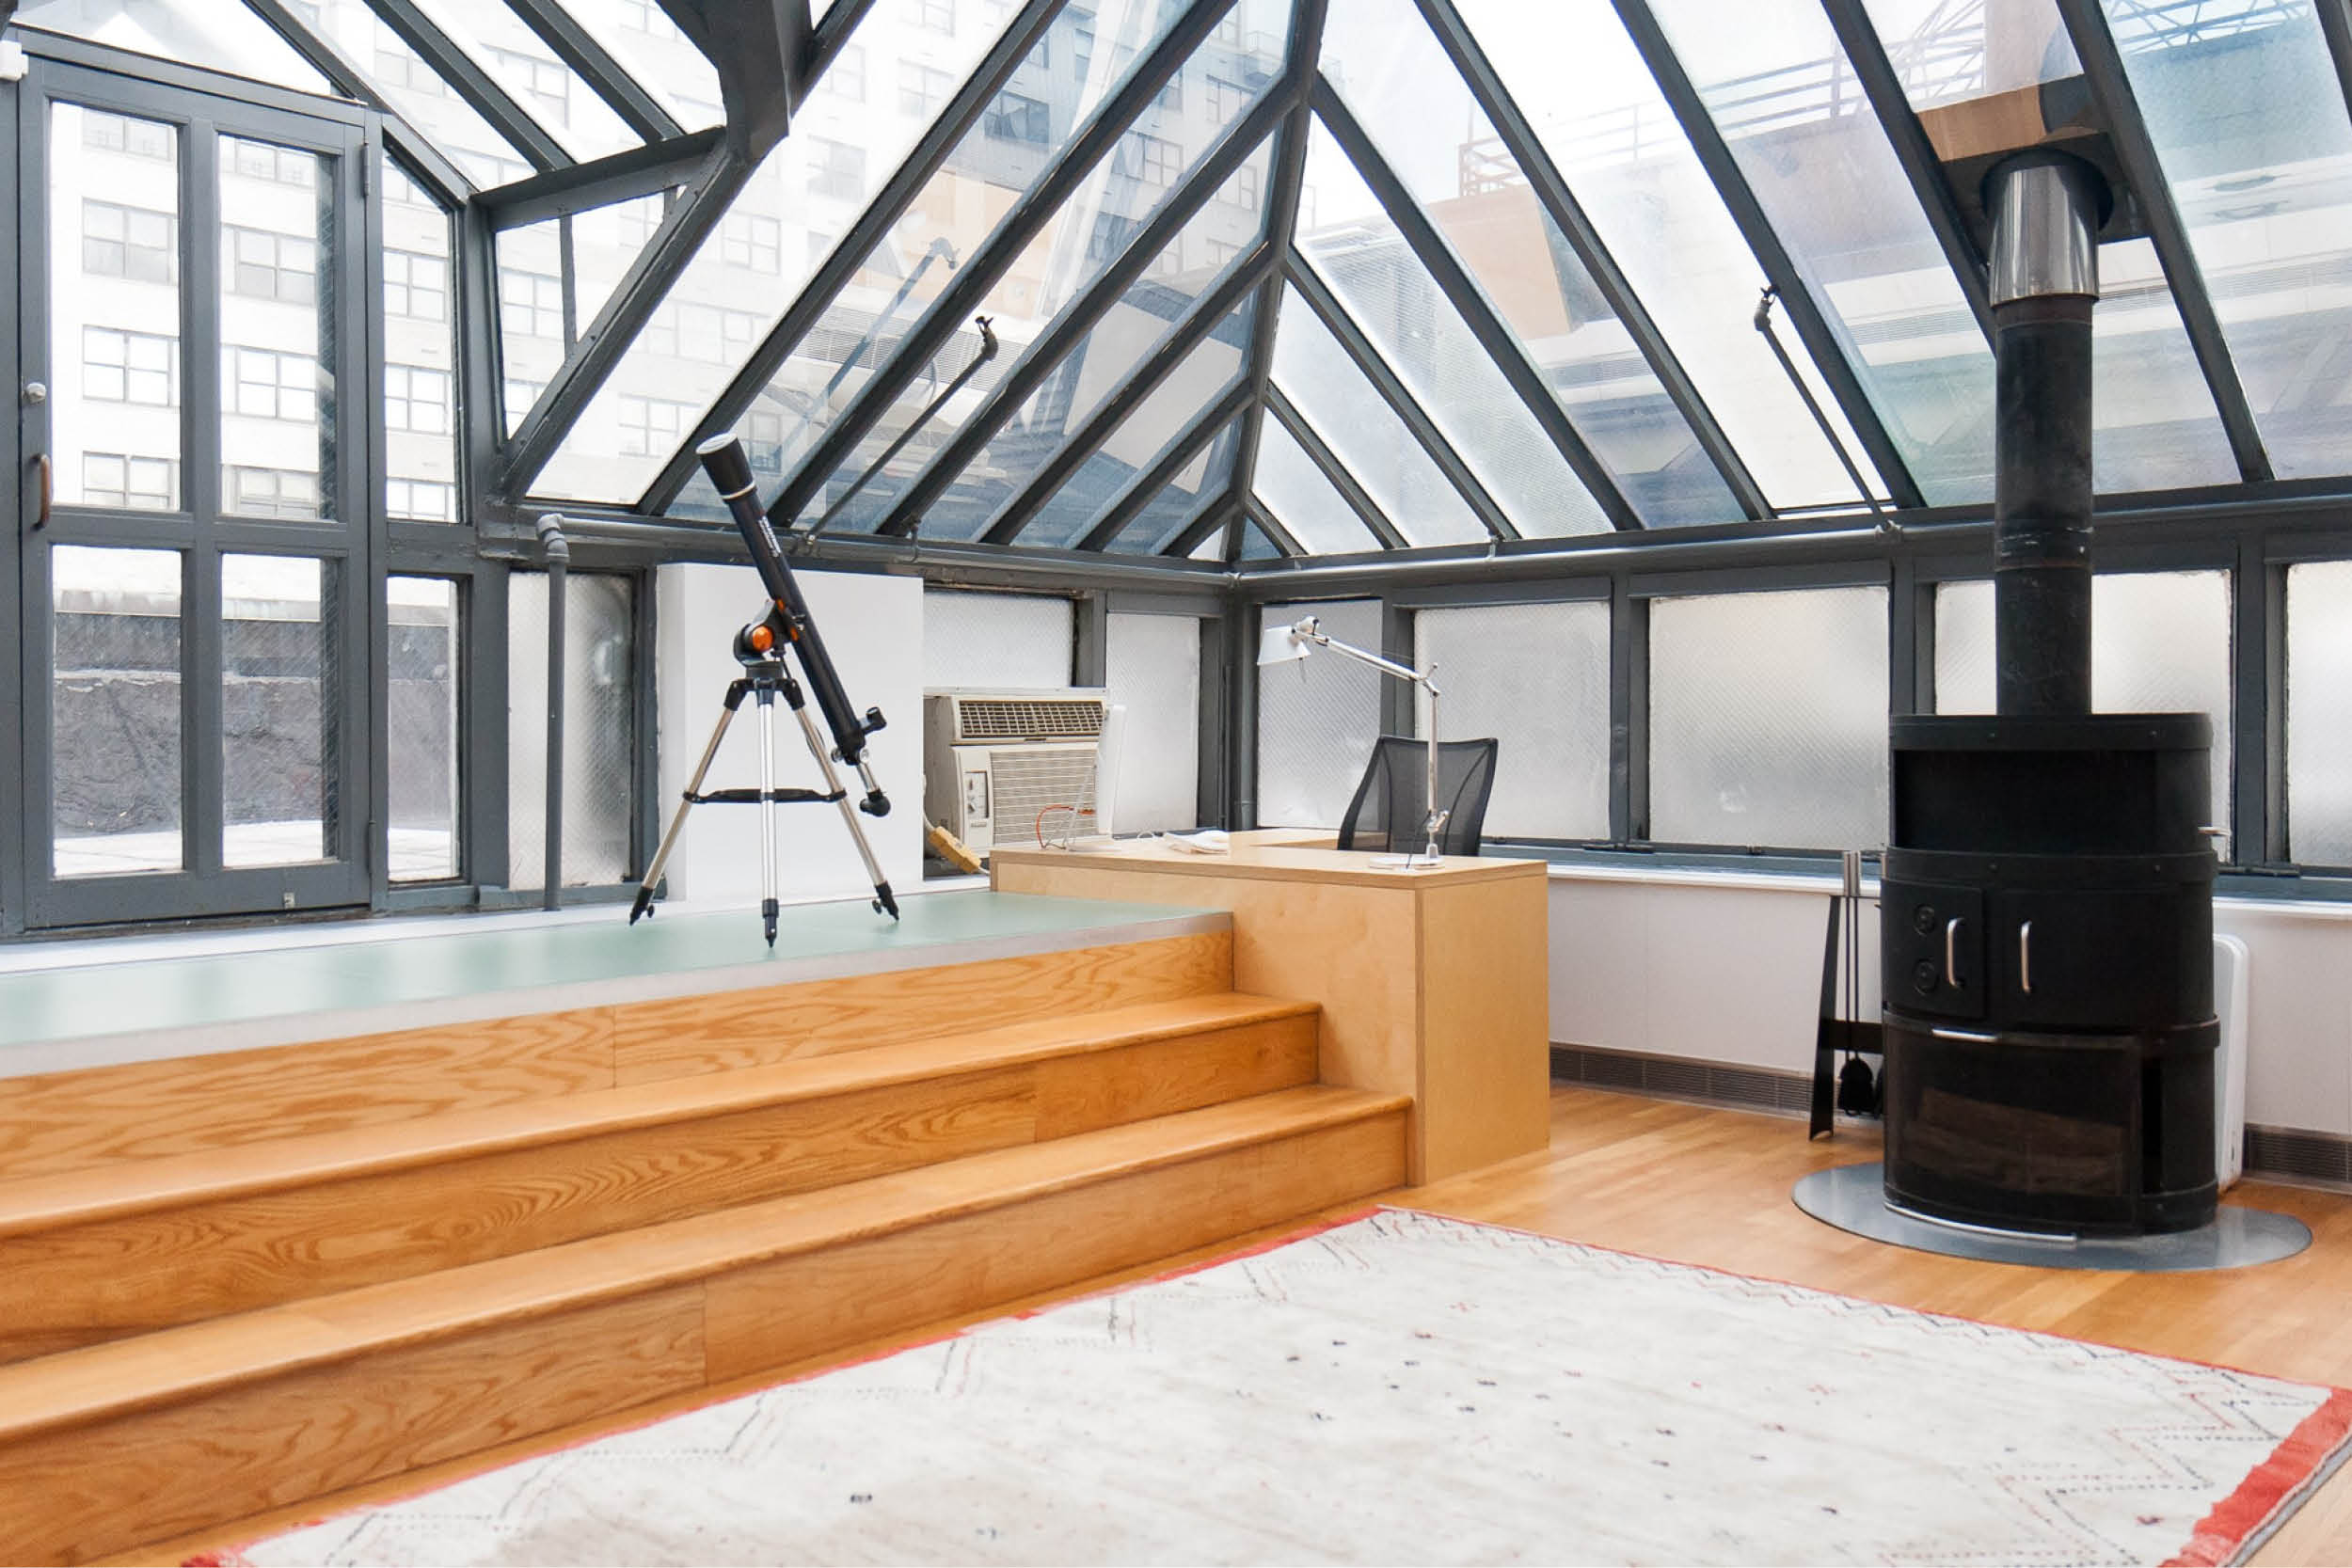 Loft Apartment Renovation | Union Square New York City 14th Street | Living Room Skylight Glass Roof Wood Steps Fireplace | RES4